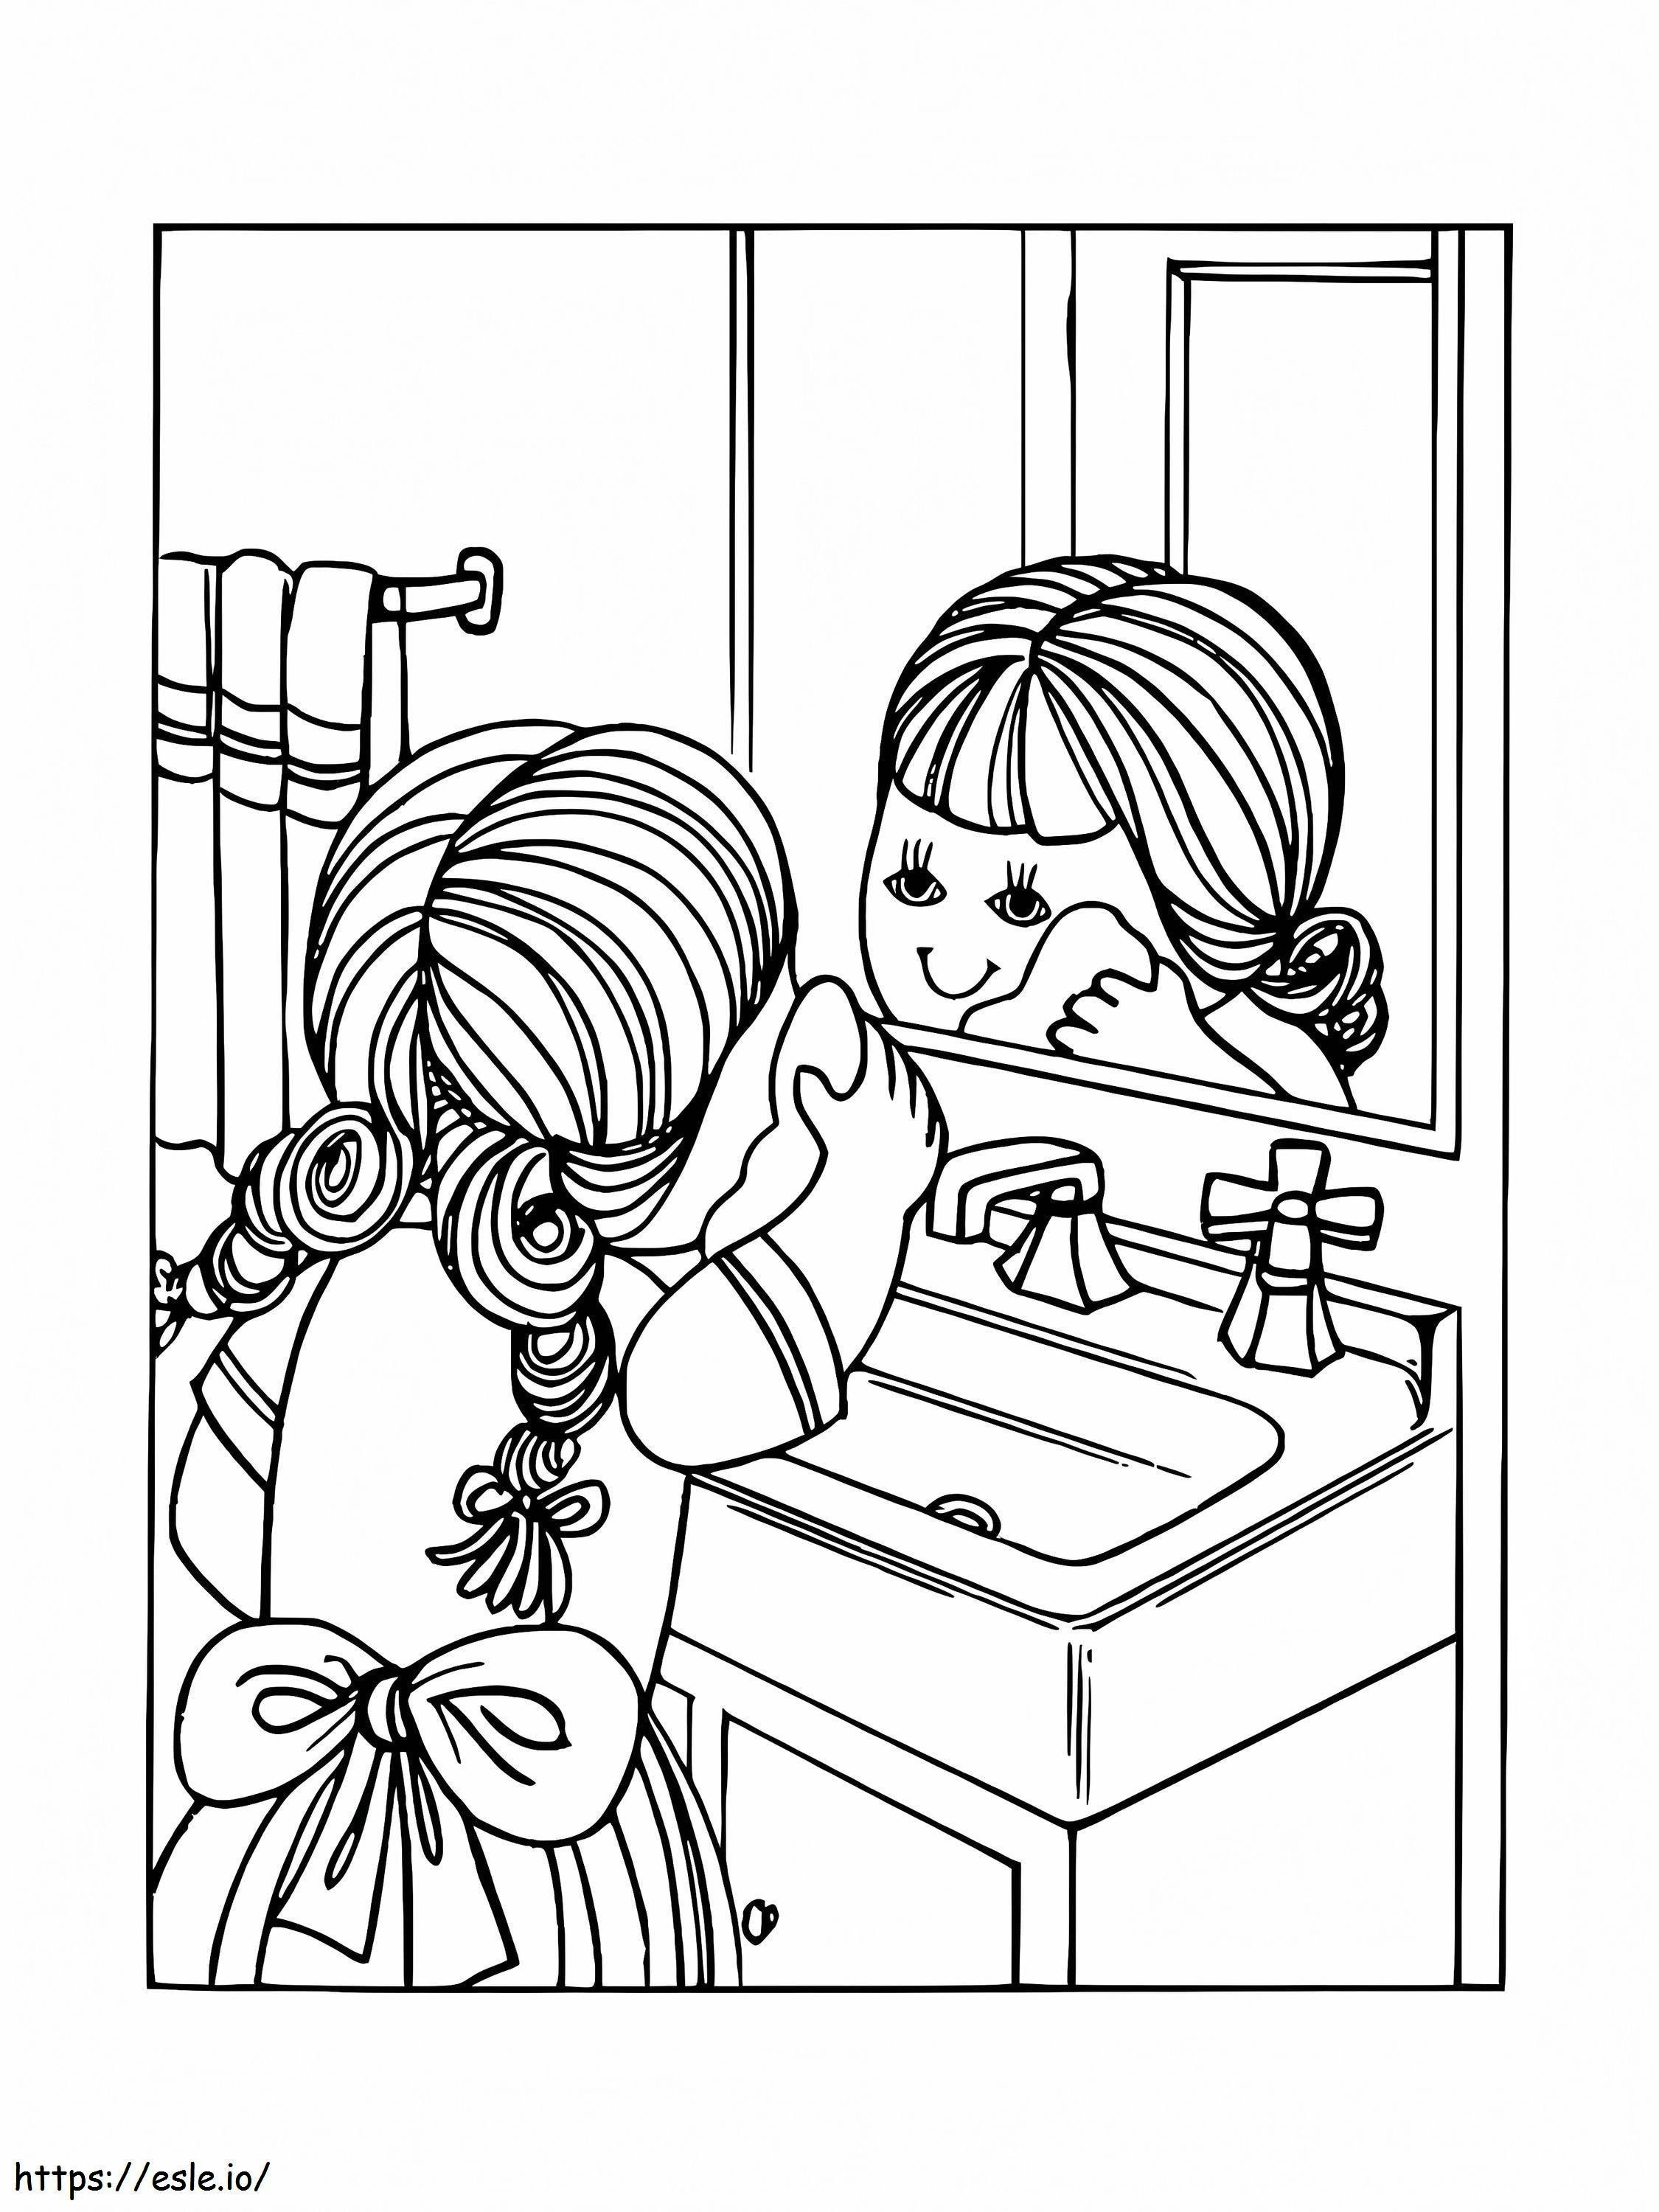 Print Good Hygiene coloring page